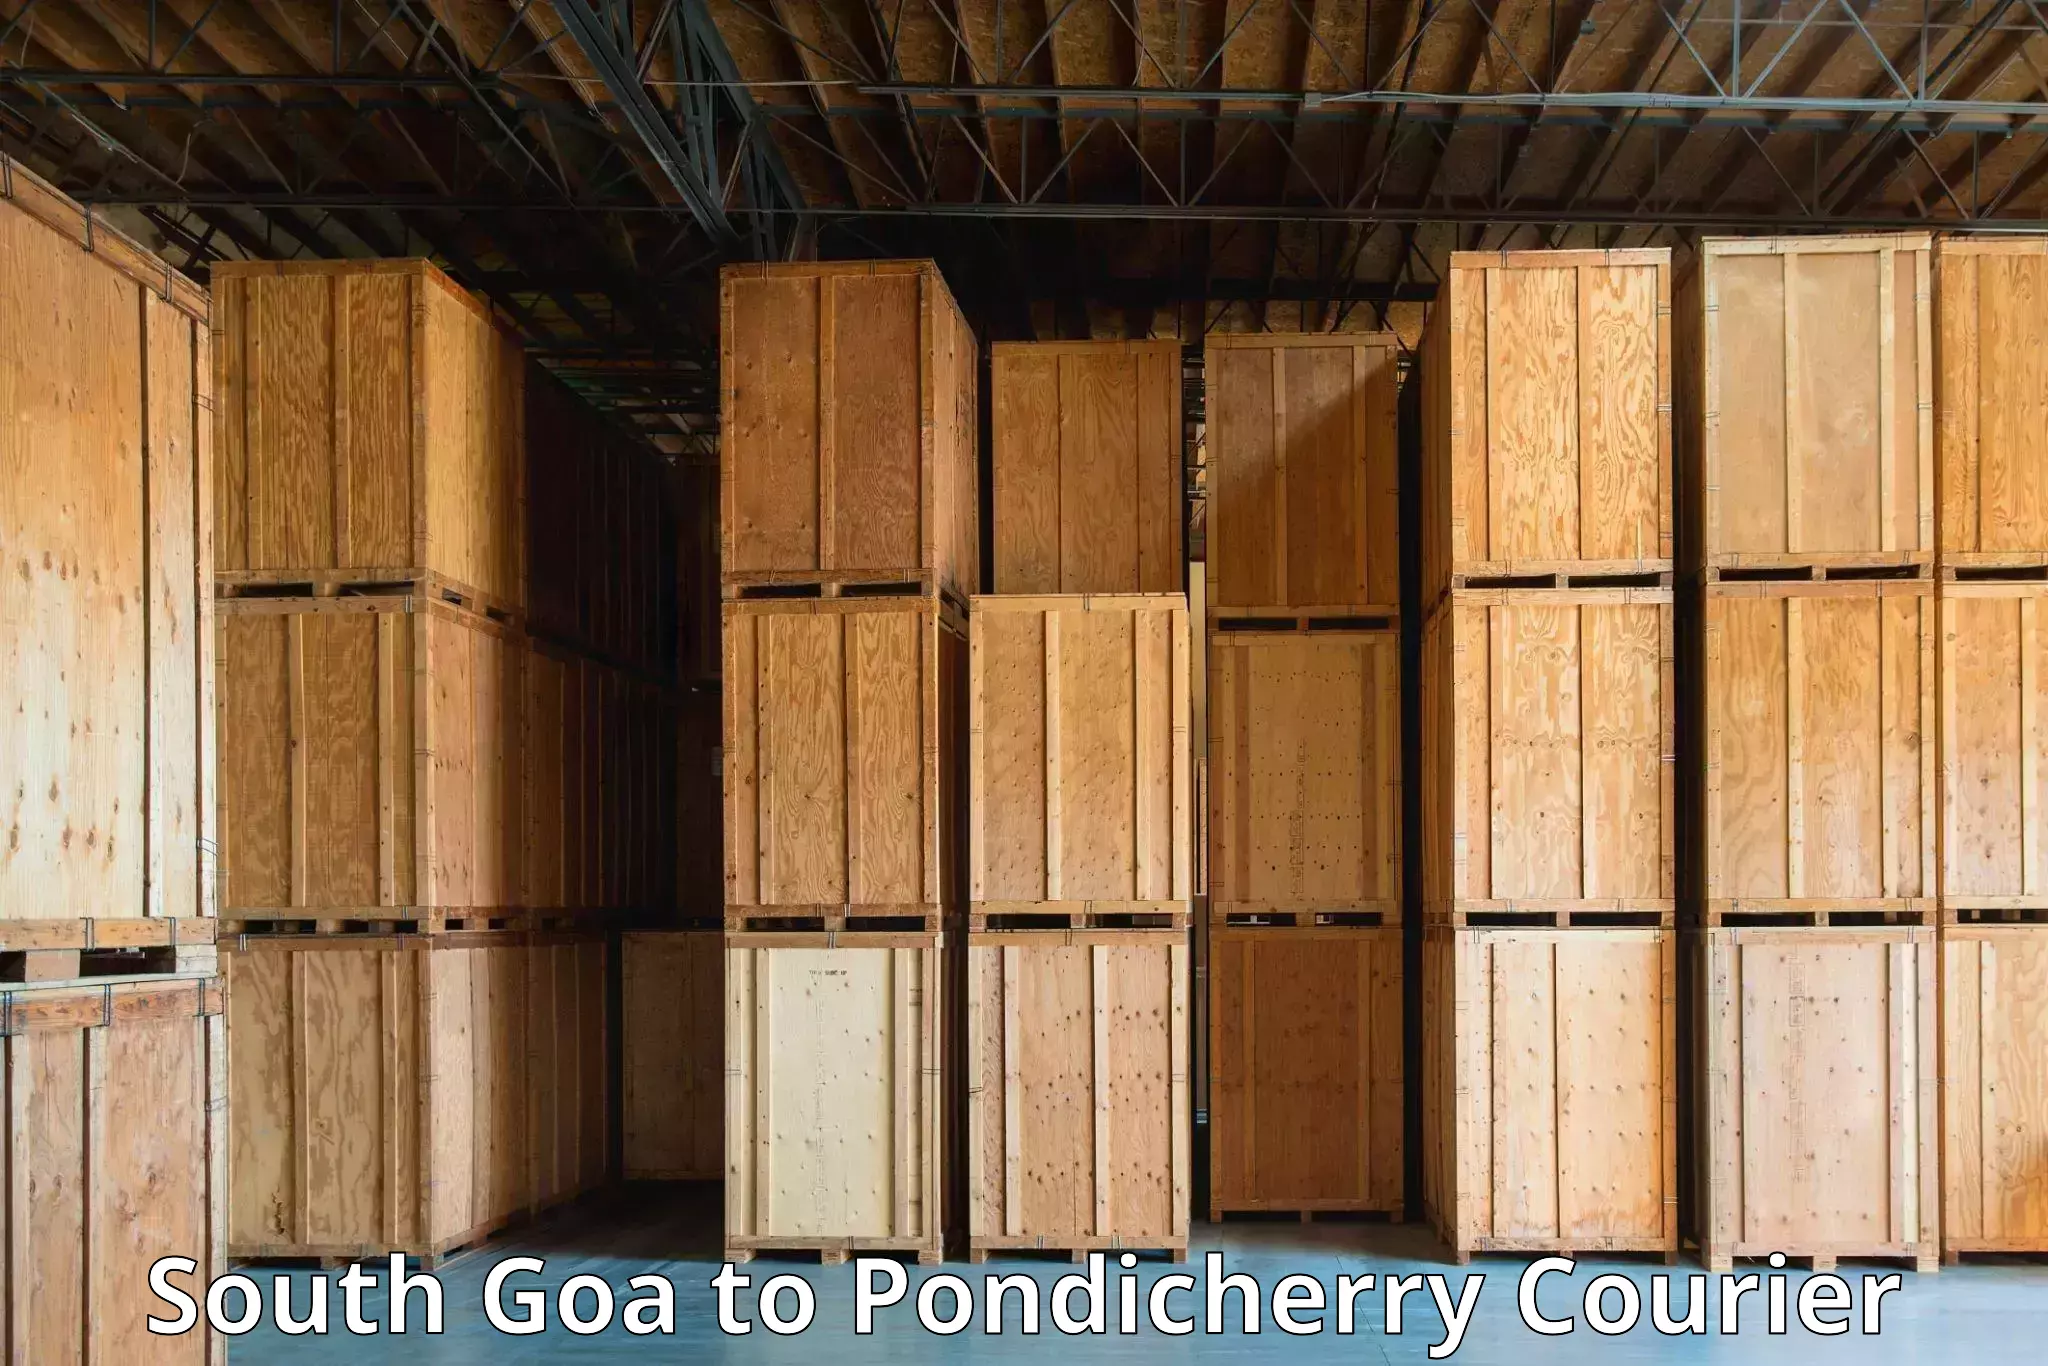 Residential courier service South Goa to Pondicherry